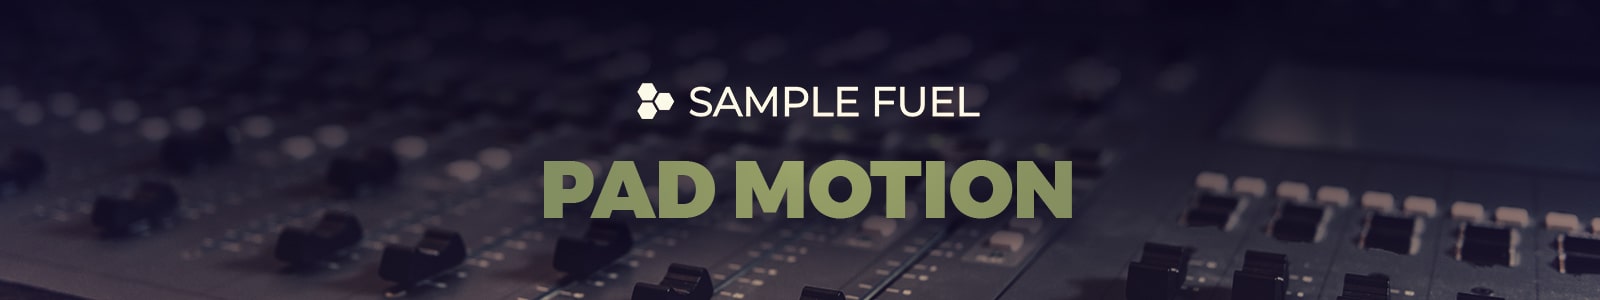 pad motion 3.0 by sample fuel